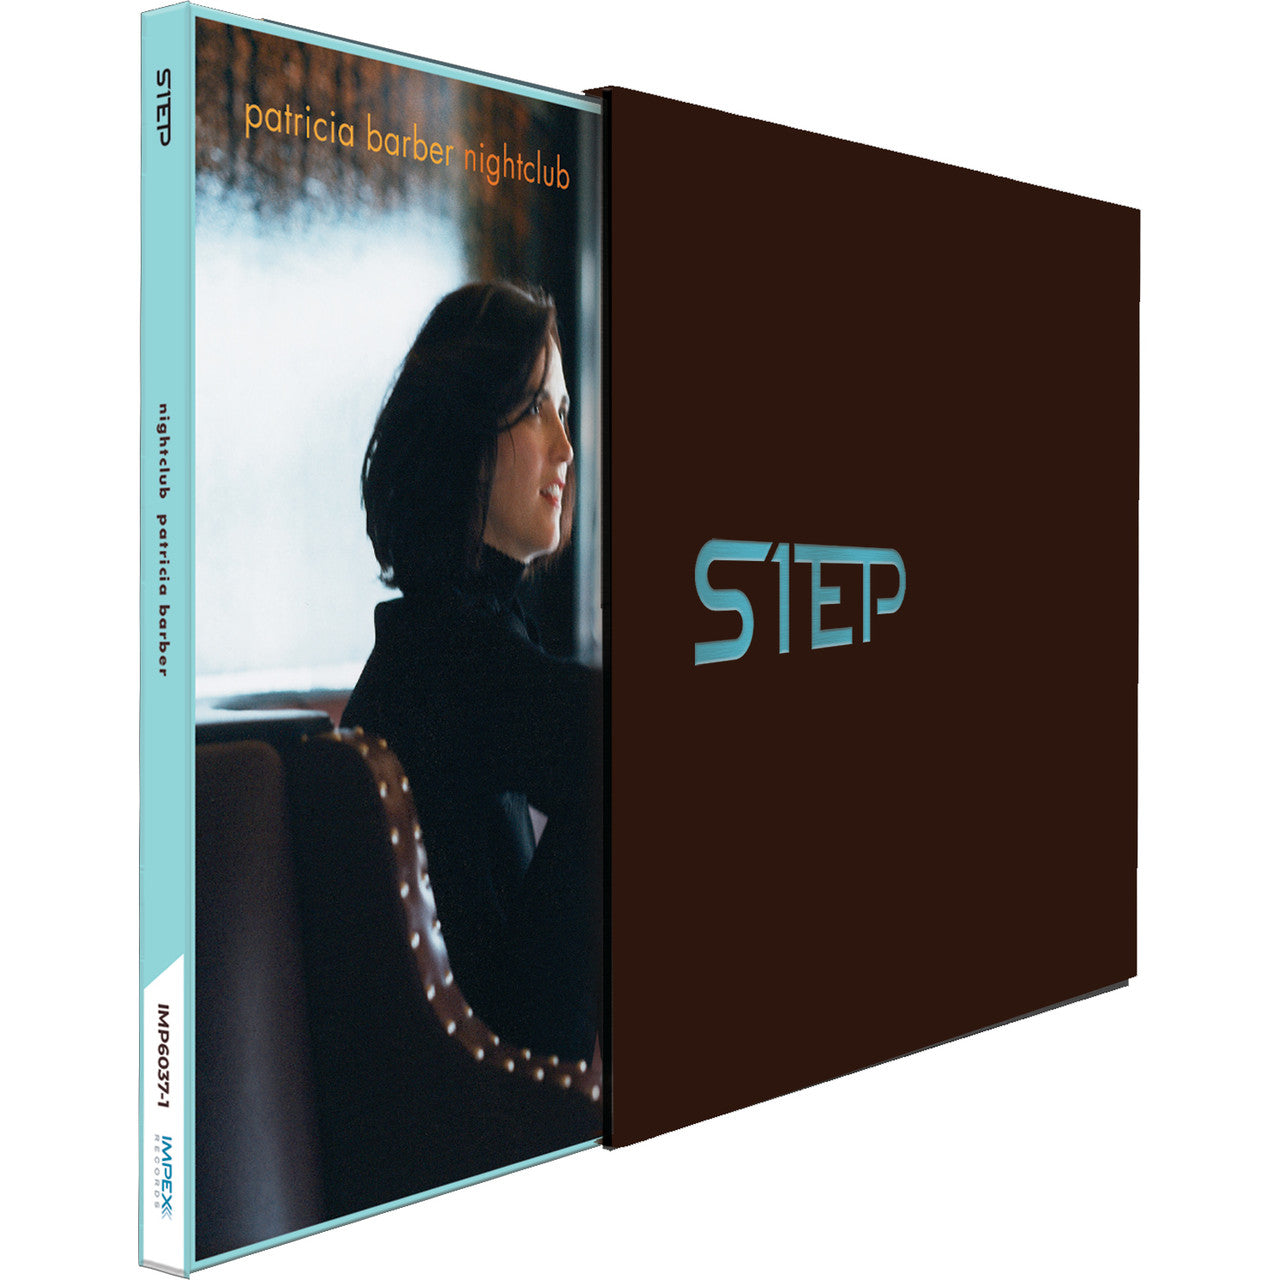 Patricia Barber - Nightclub - (Limited Edition 1STEP + Book) - Impex LP